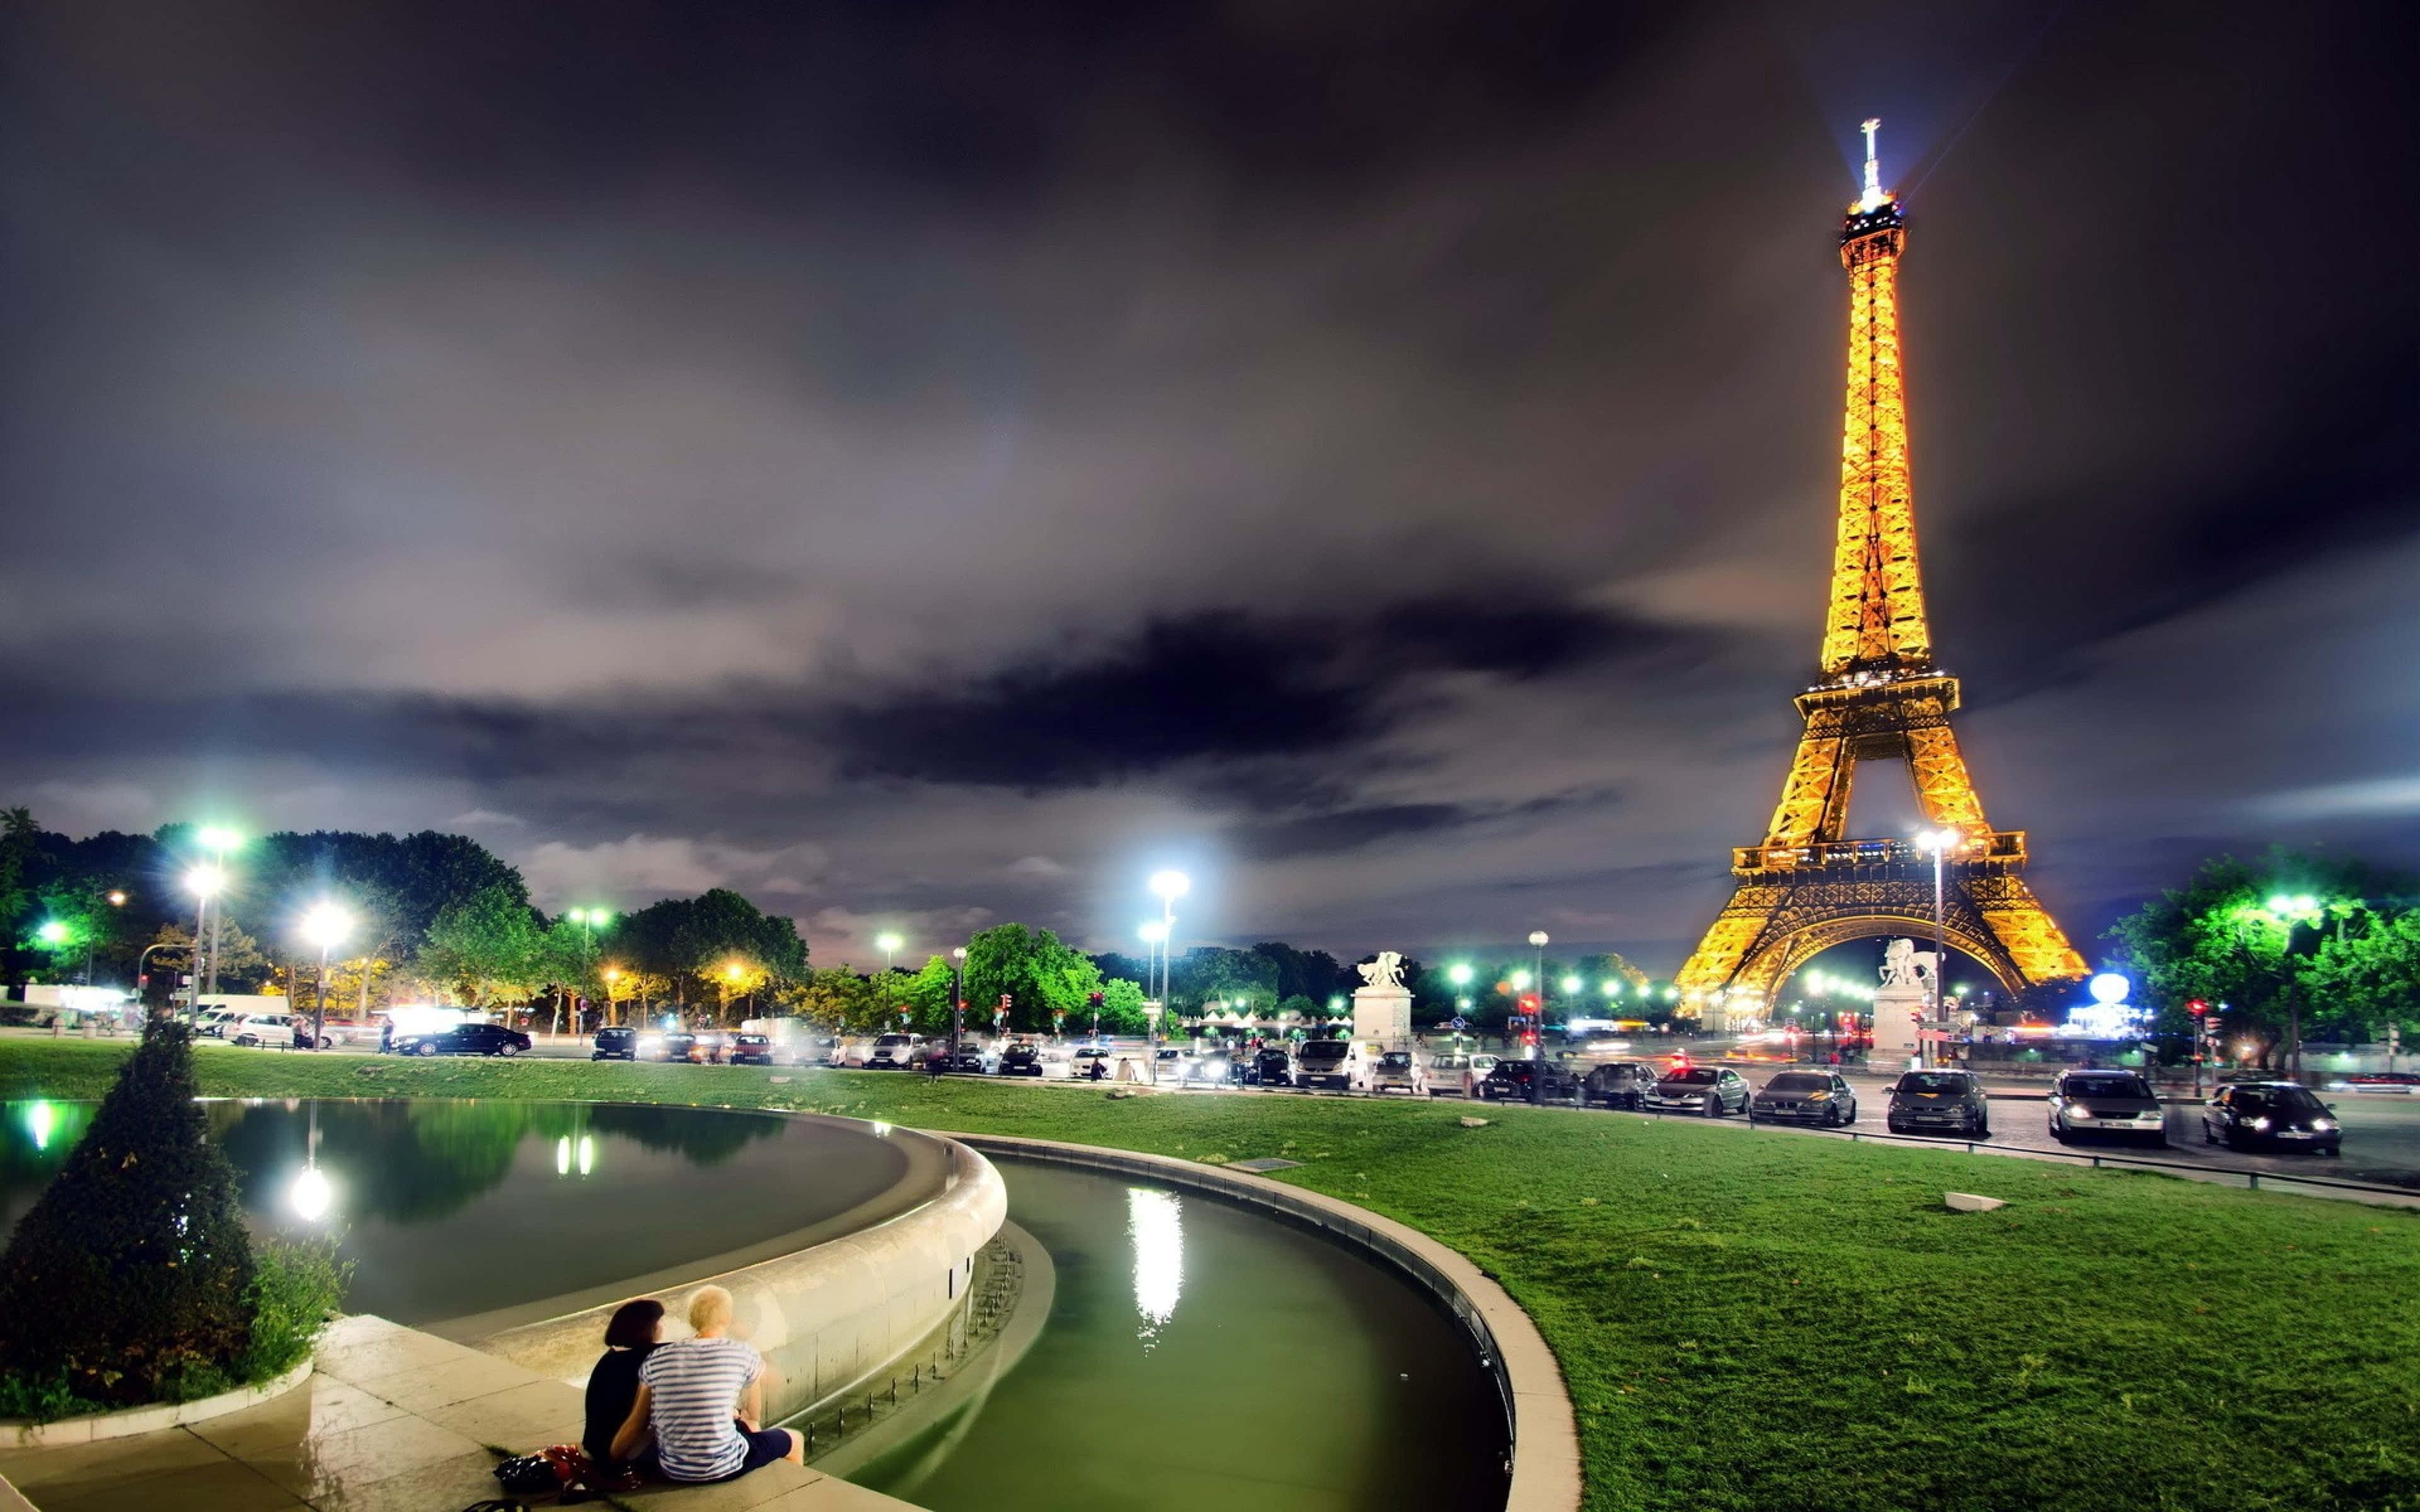 "A beautiful evening view of the Eiffel Tower"